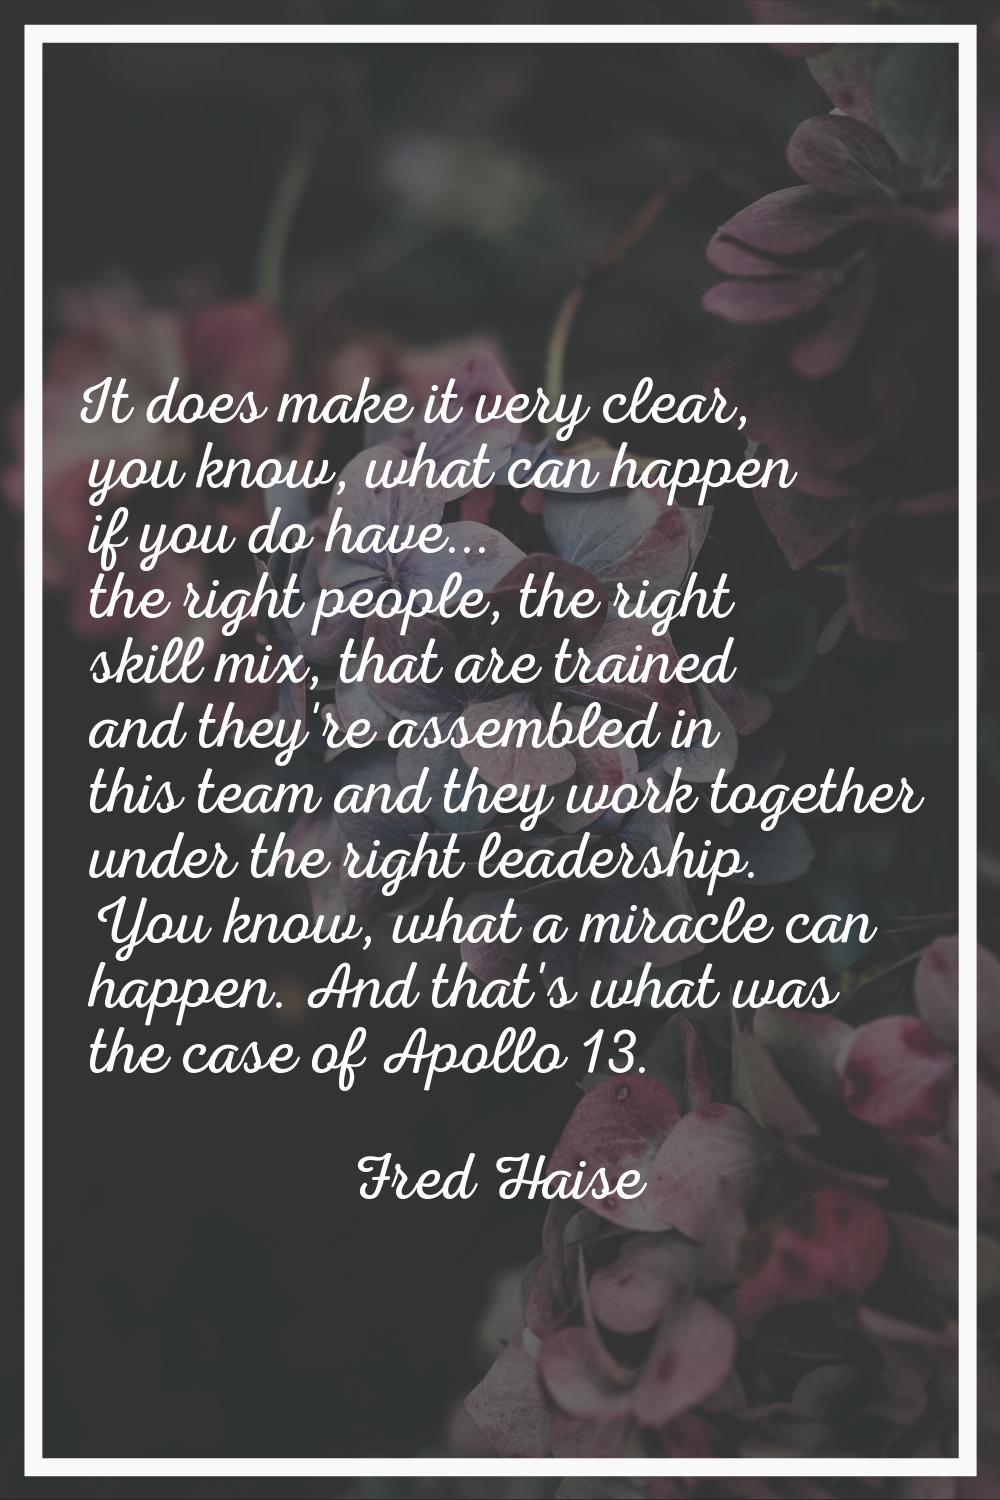 It does make it very clear, you know, what can happen if you do have... the right people, the right